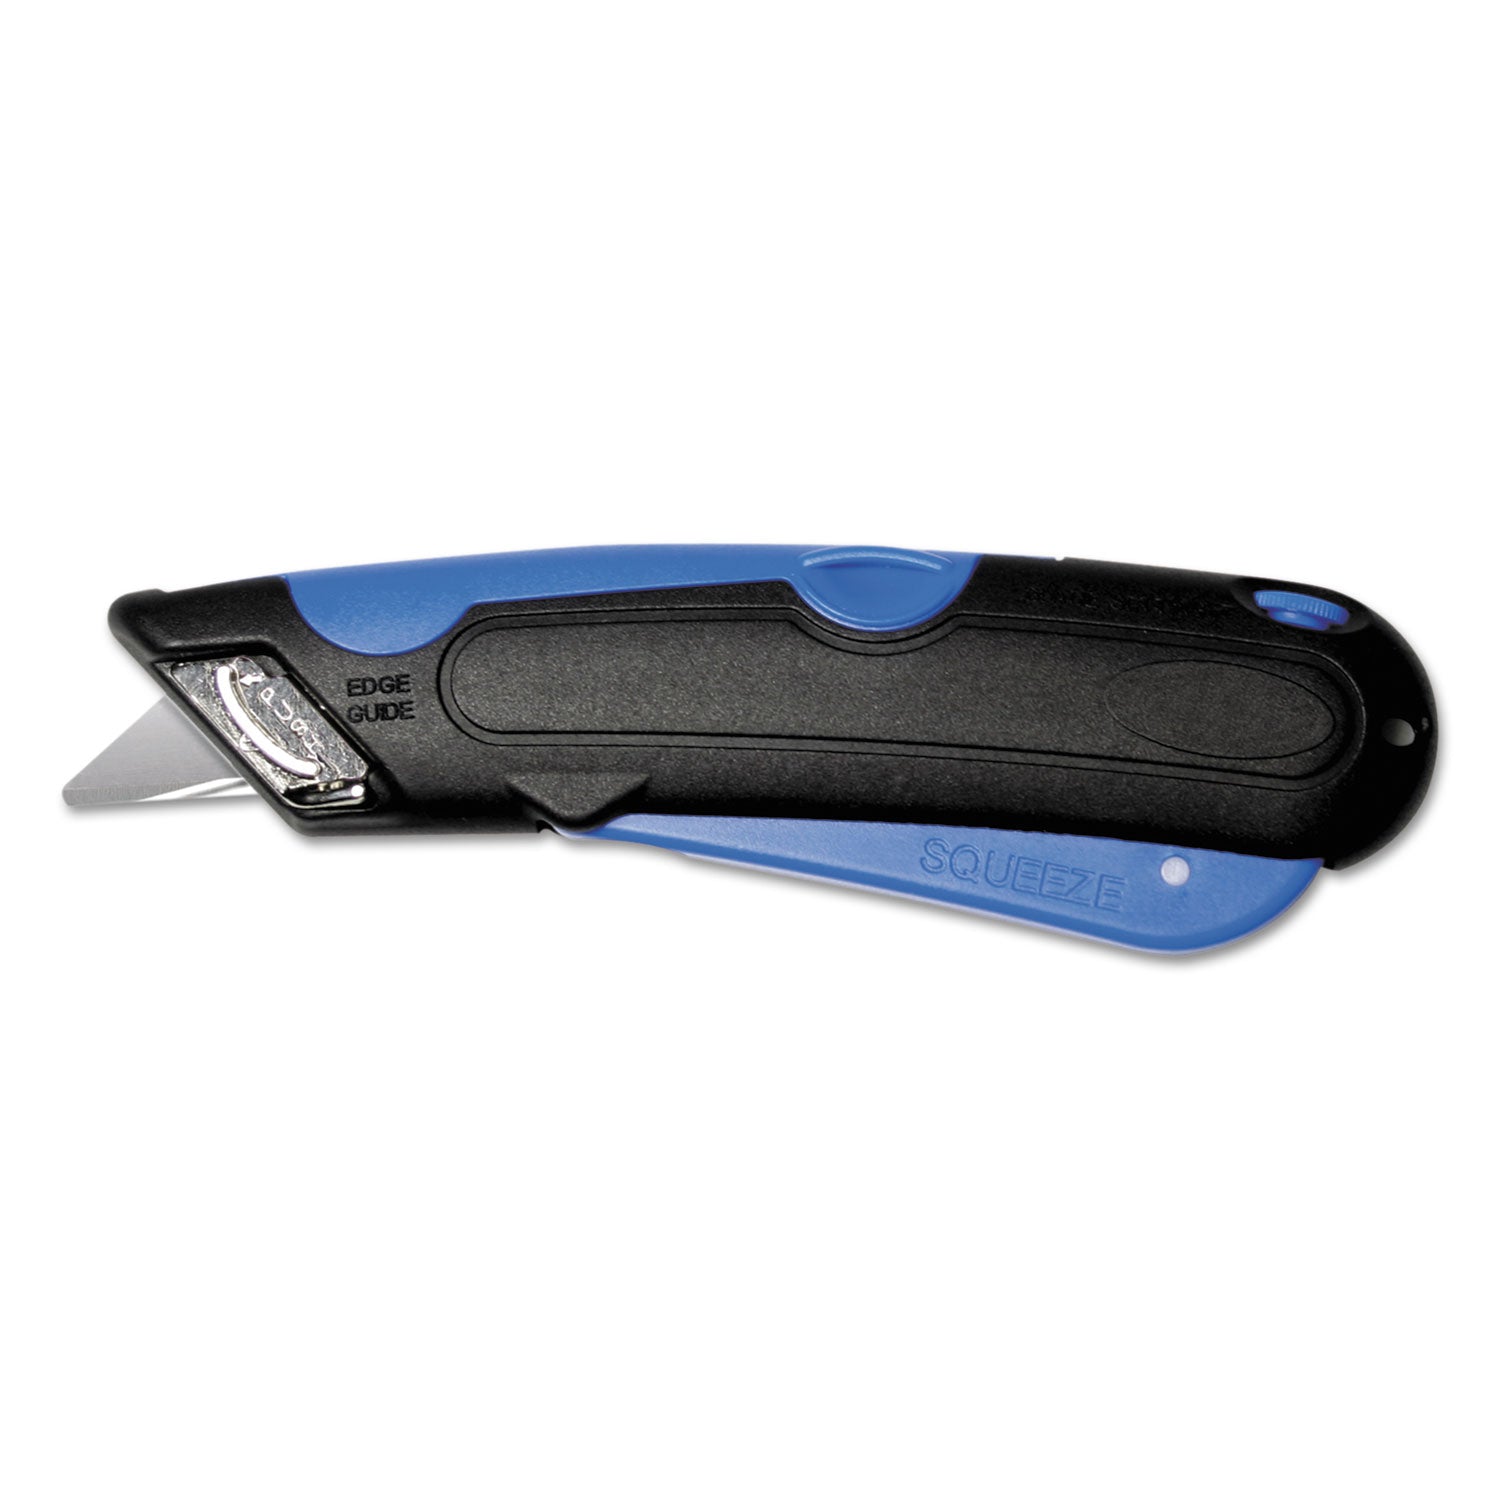 Easycut Self-Retracting Cutter with Safety-Tip Blade, Holster and Lanyard, 6" Plastic Handle, Black/Blue - 